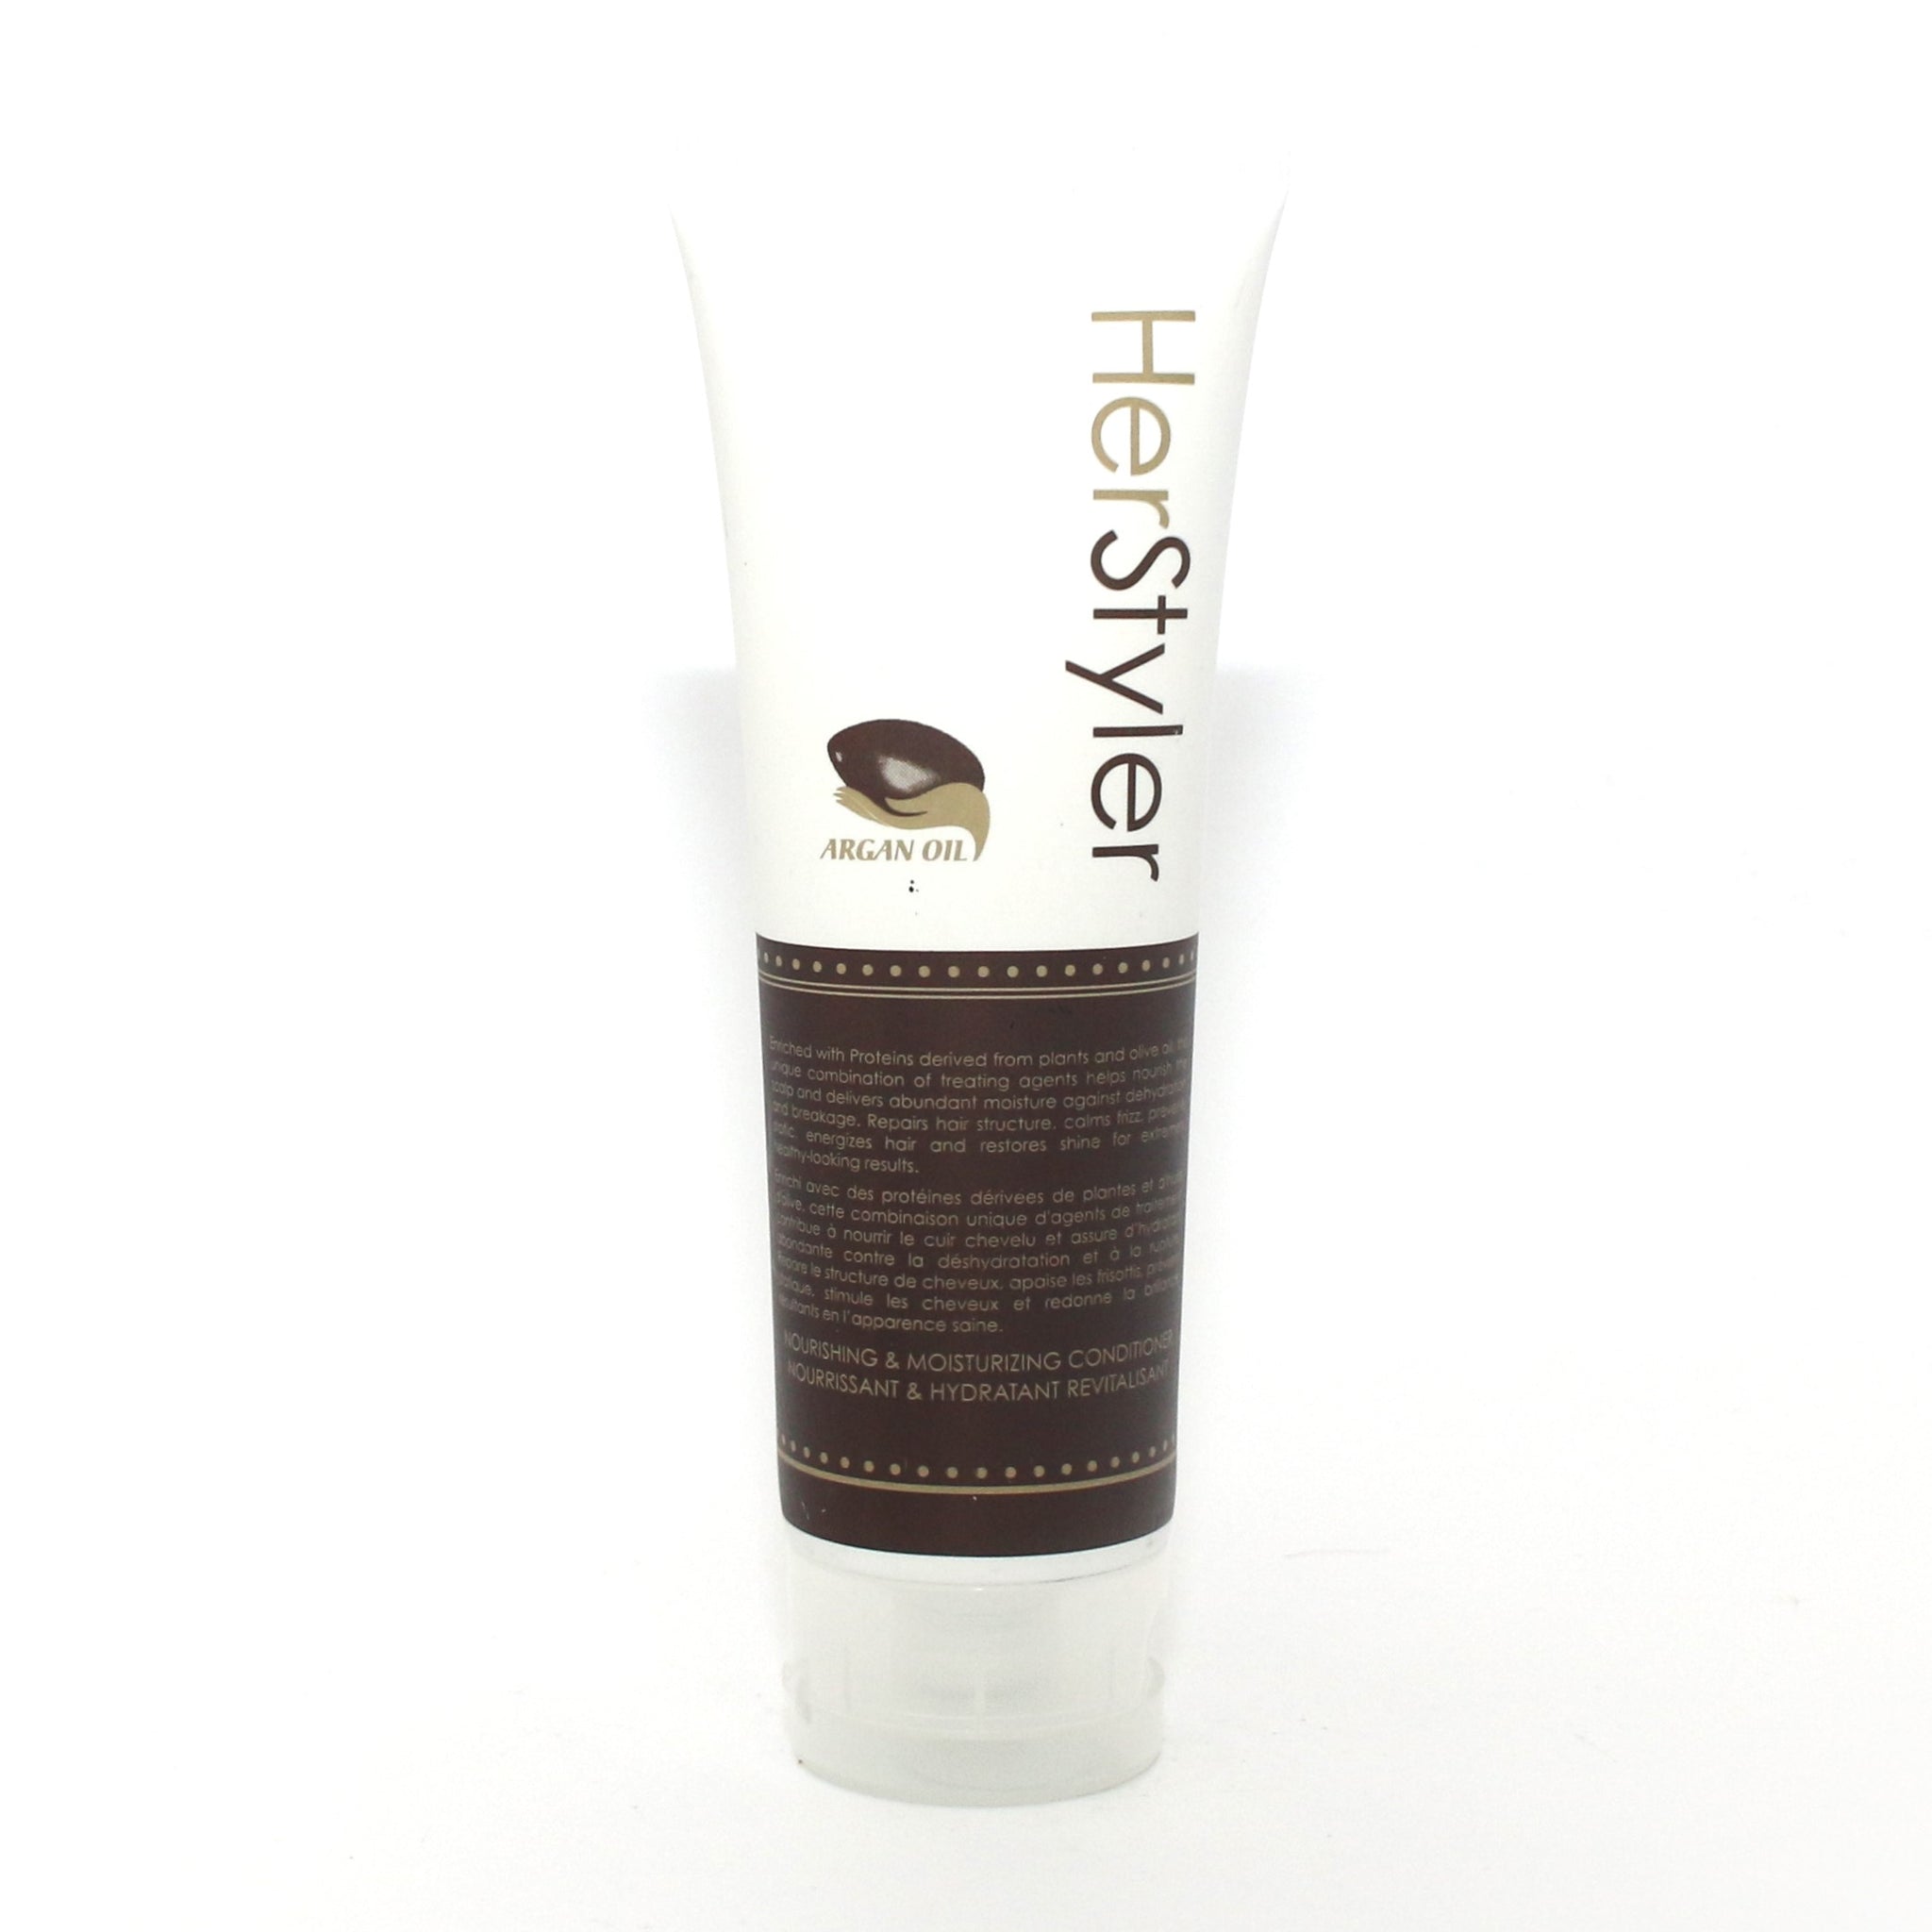 Her Style Argan Oil Nourishing and Moisturizing Conditioner 4 oz